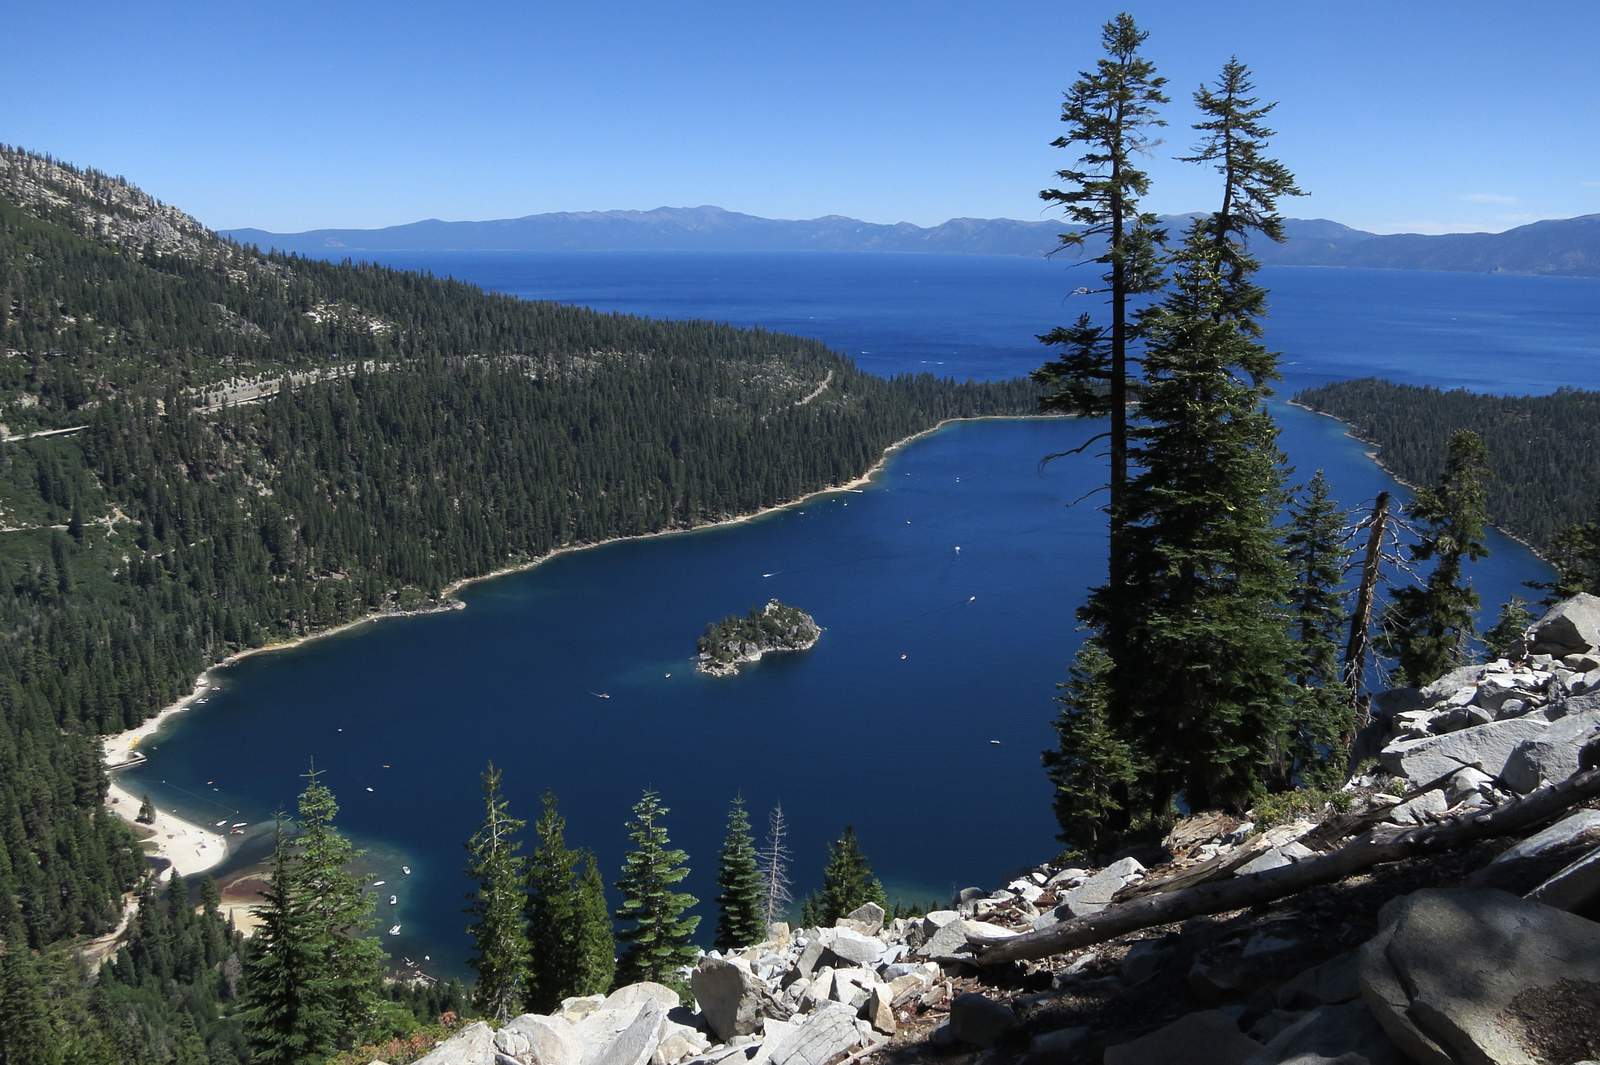 Texas woman drowns after falling off boat in Lake Tahoe